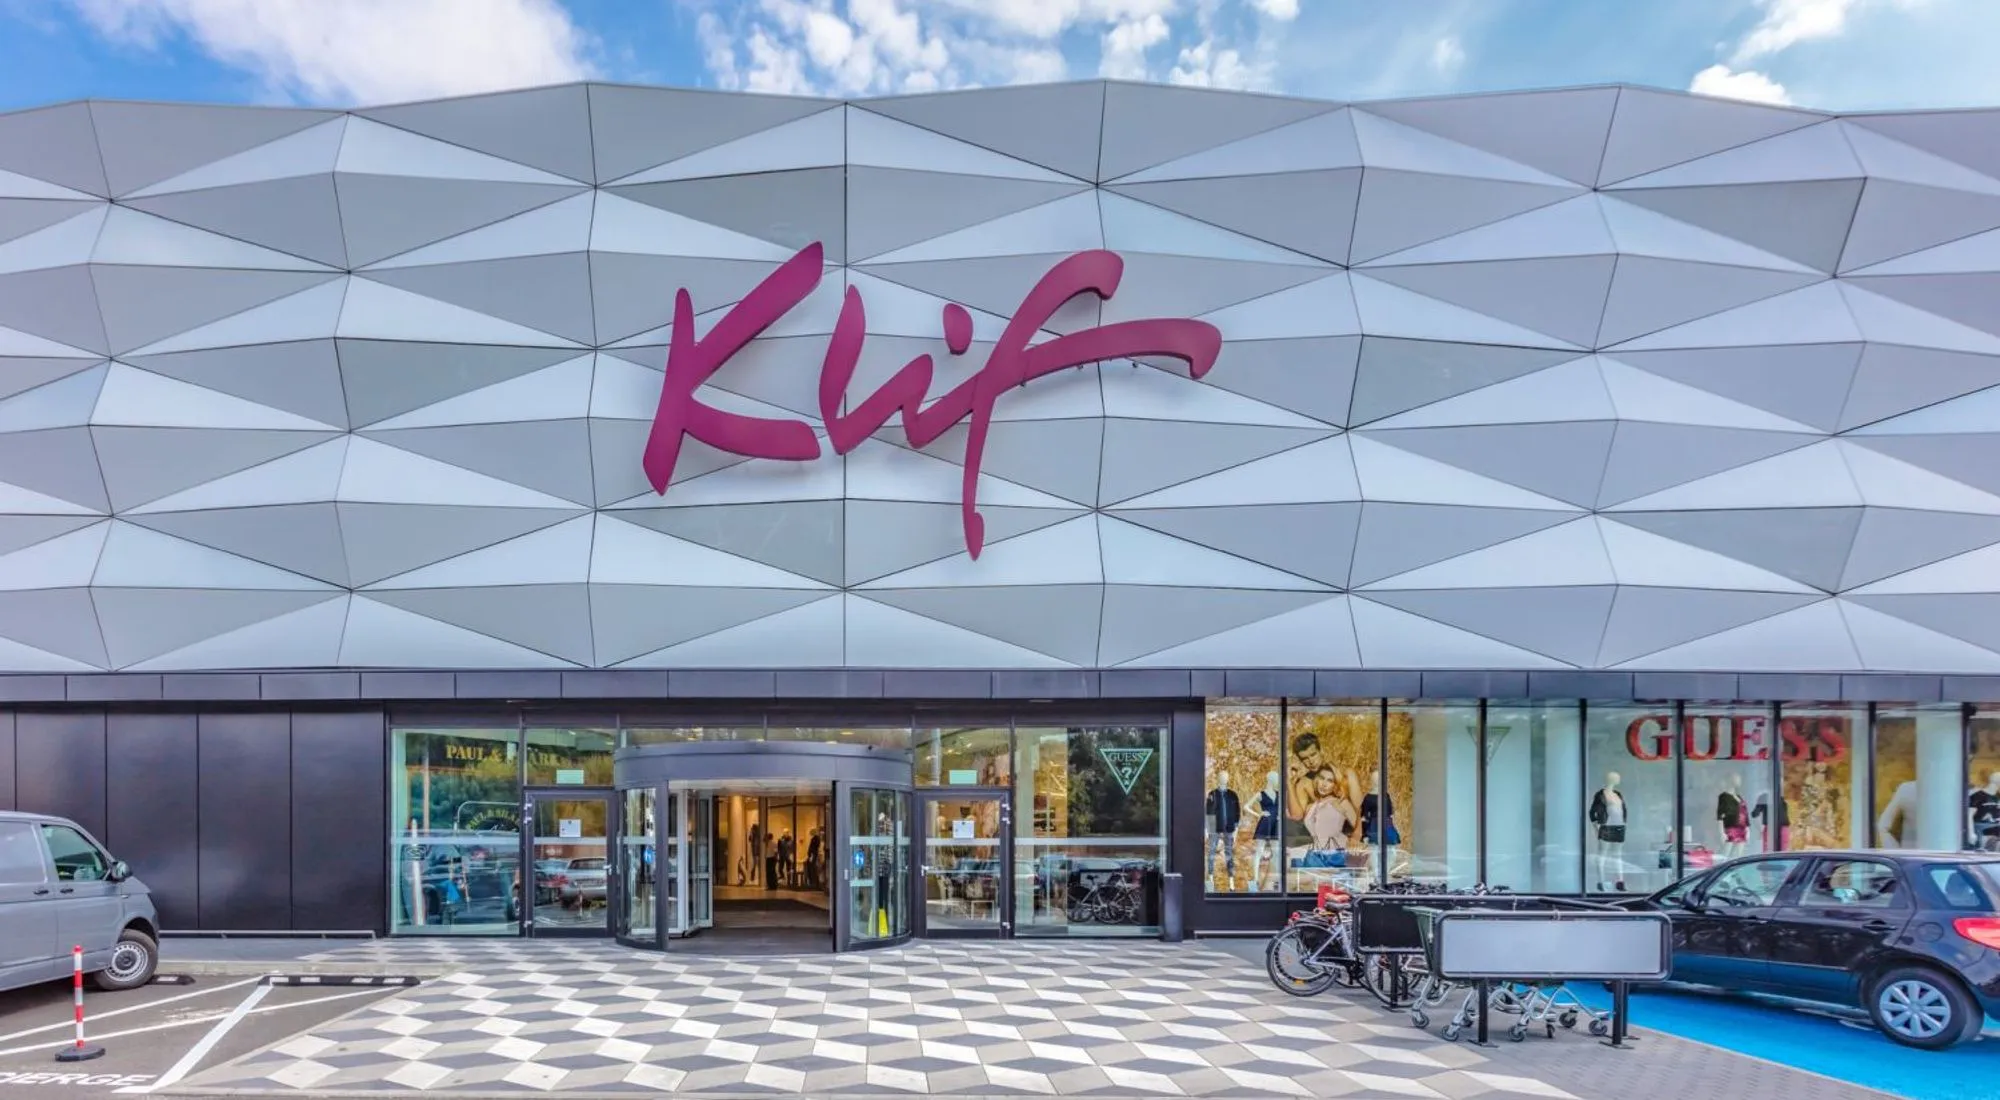 Fashion House Shopping Center Klif in Poland, europe | Sporting Equipment,Shoes,Accessories,Clothes,Cosmetics - Country Helper